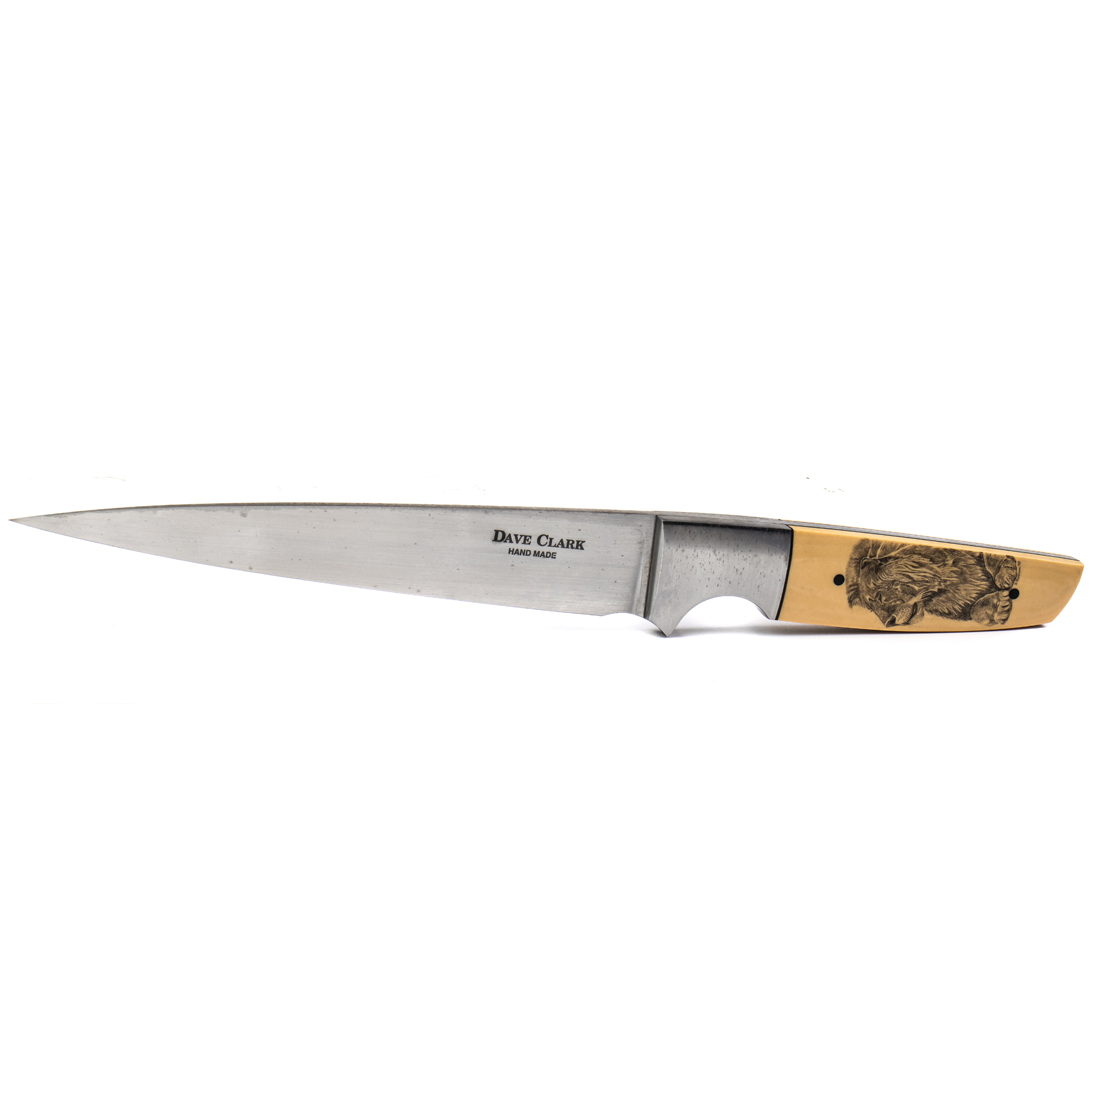 DAVE CLARK KNIFE, FITTED WITH A